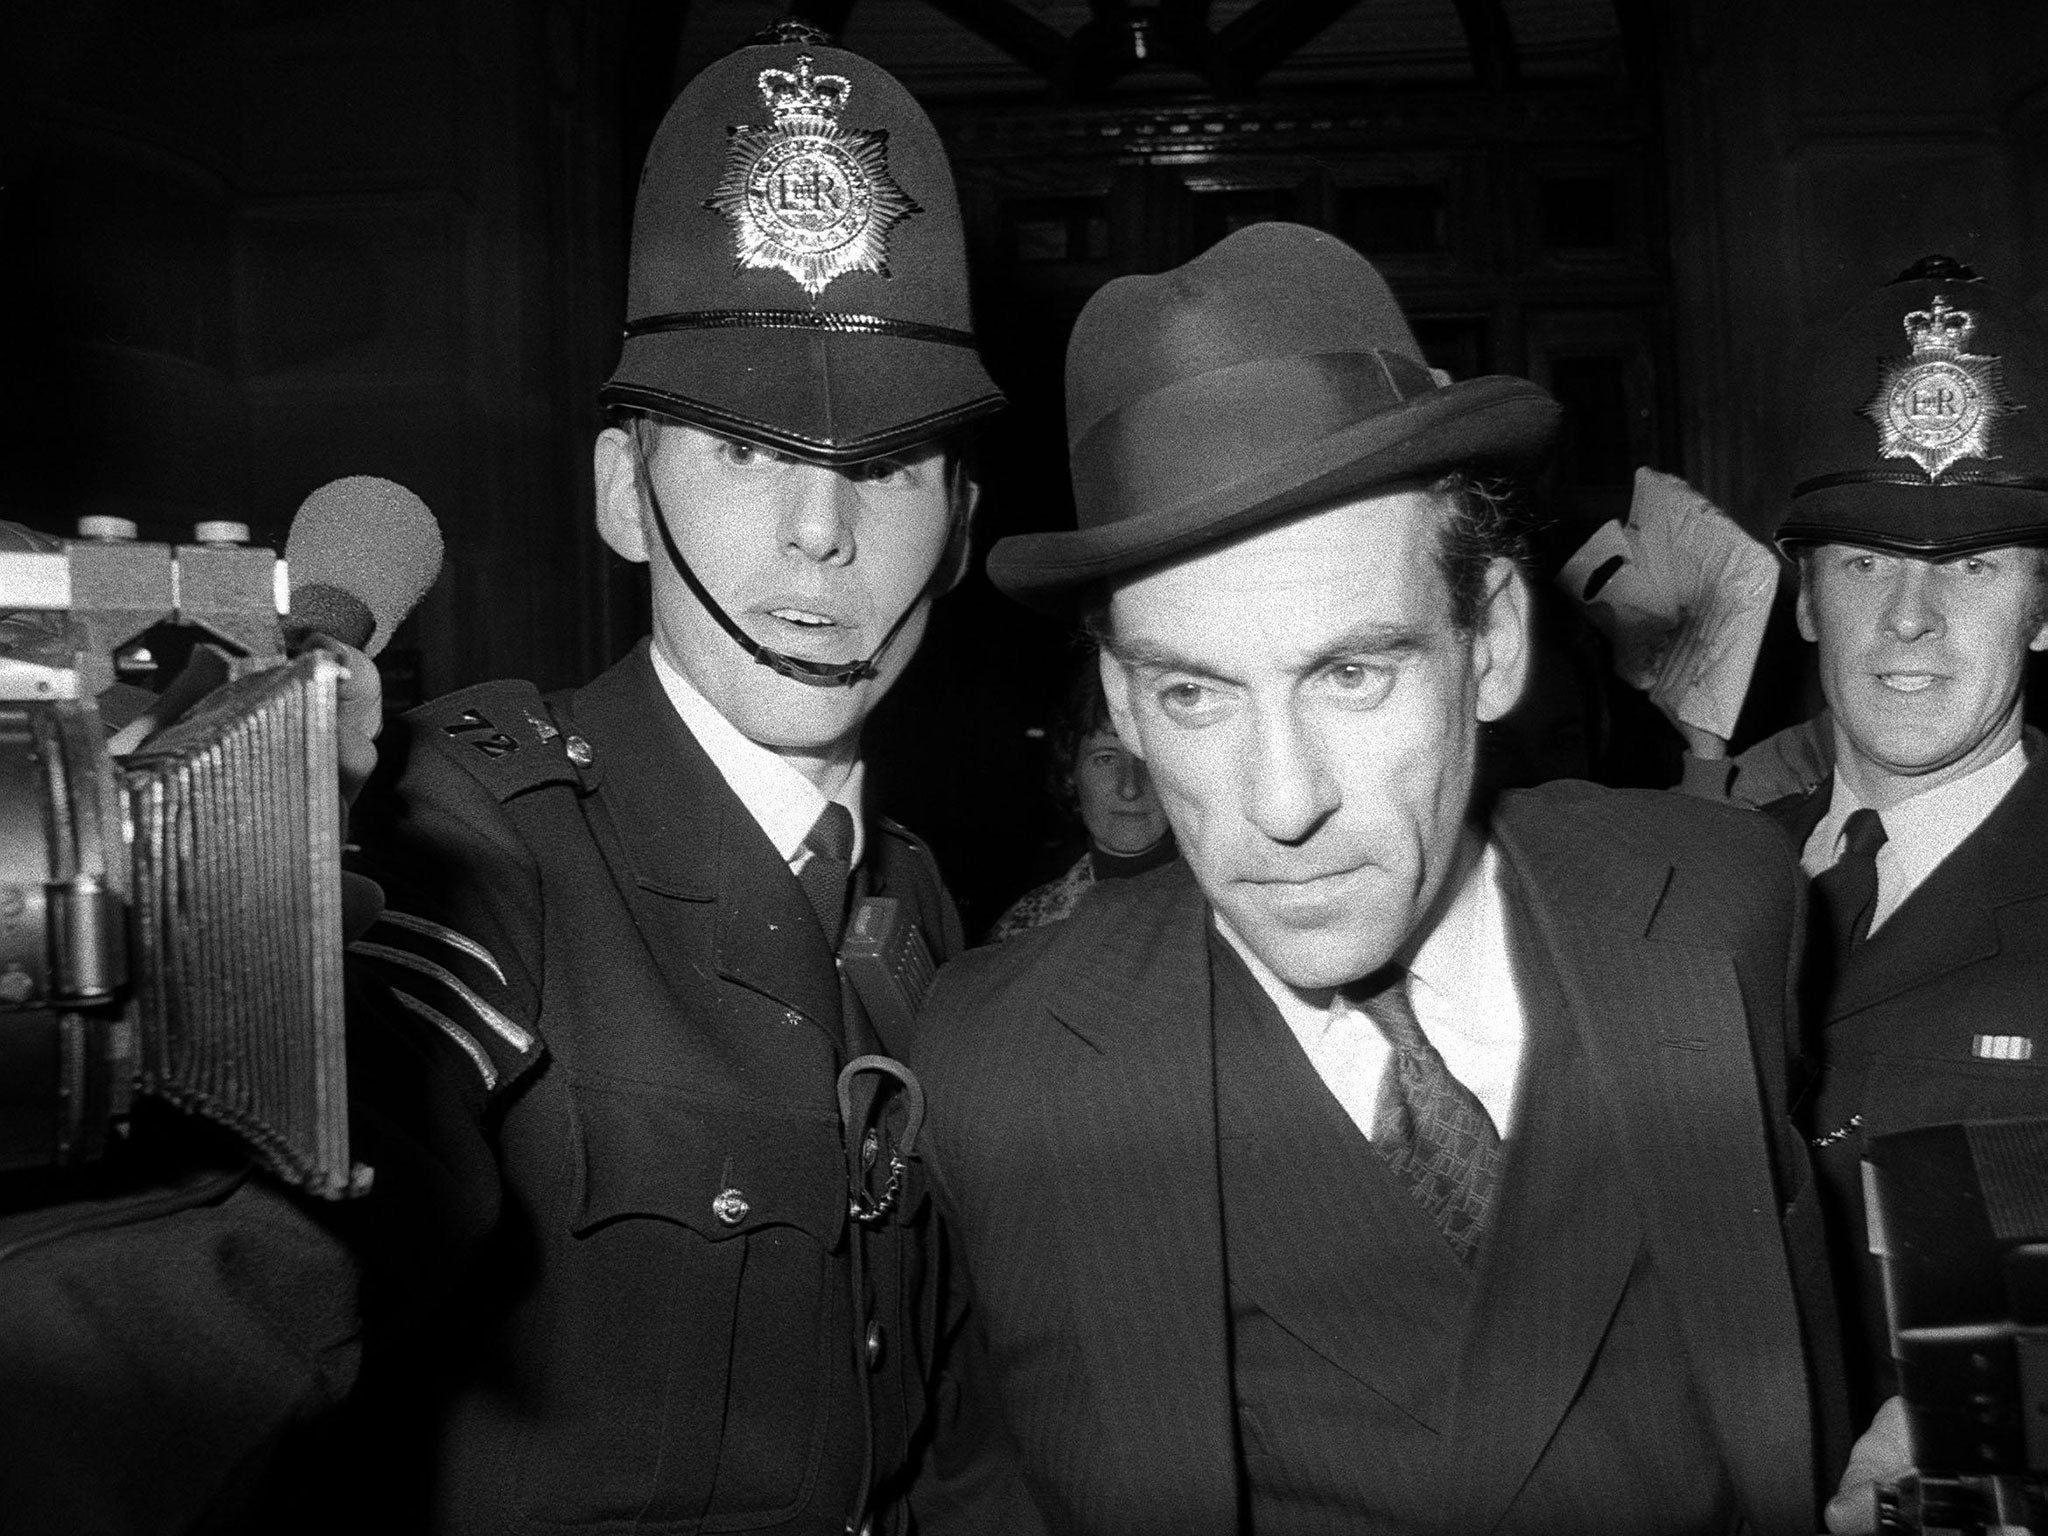 Former Liberal leader Jeremy Thorpe in 1977. Two years later he would stand trial for allegedly plotting to murder his lover